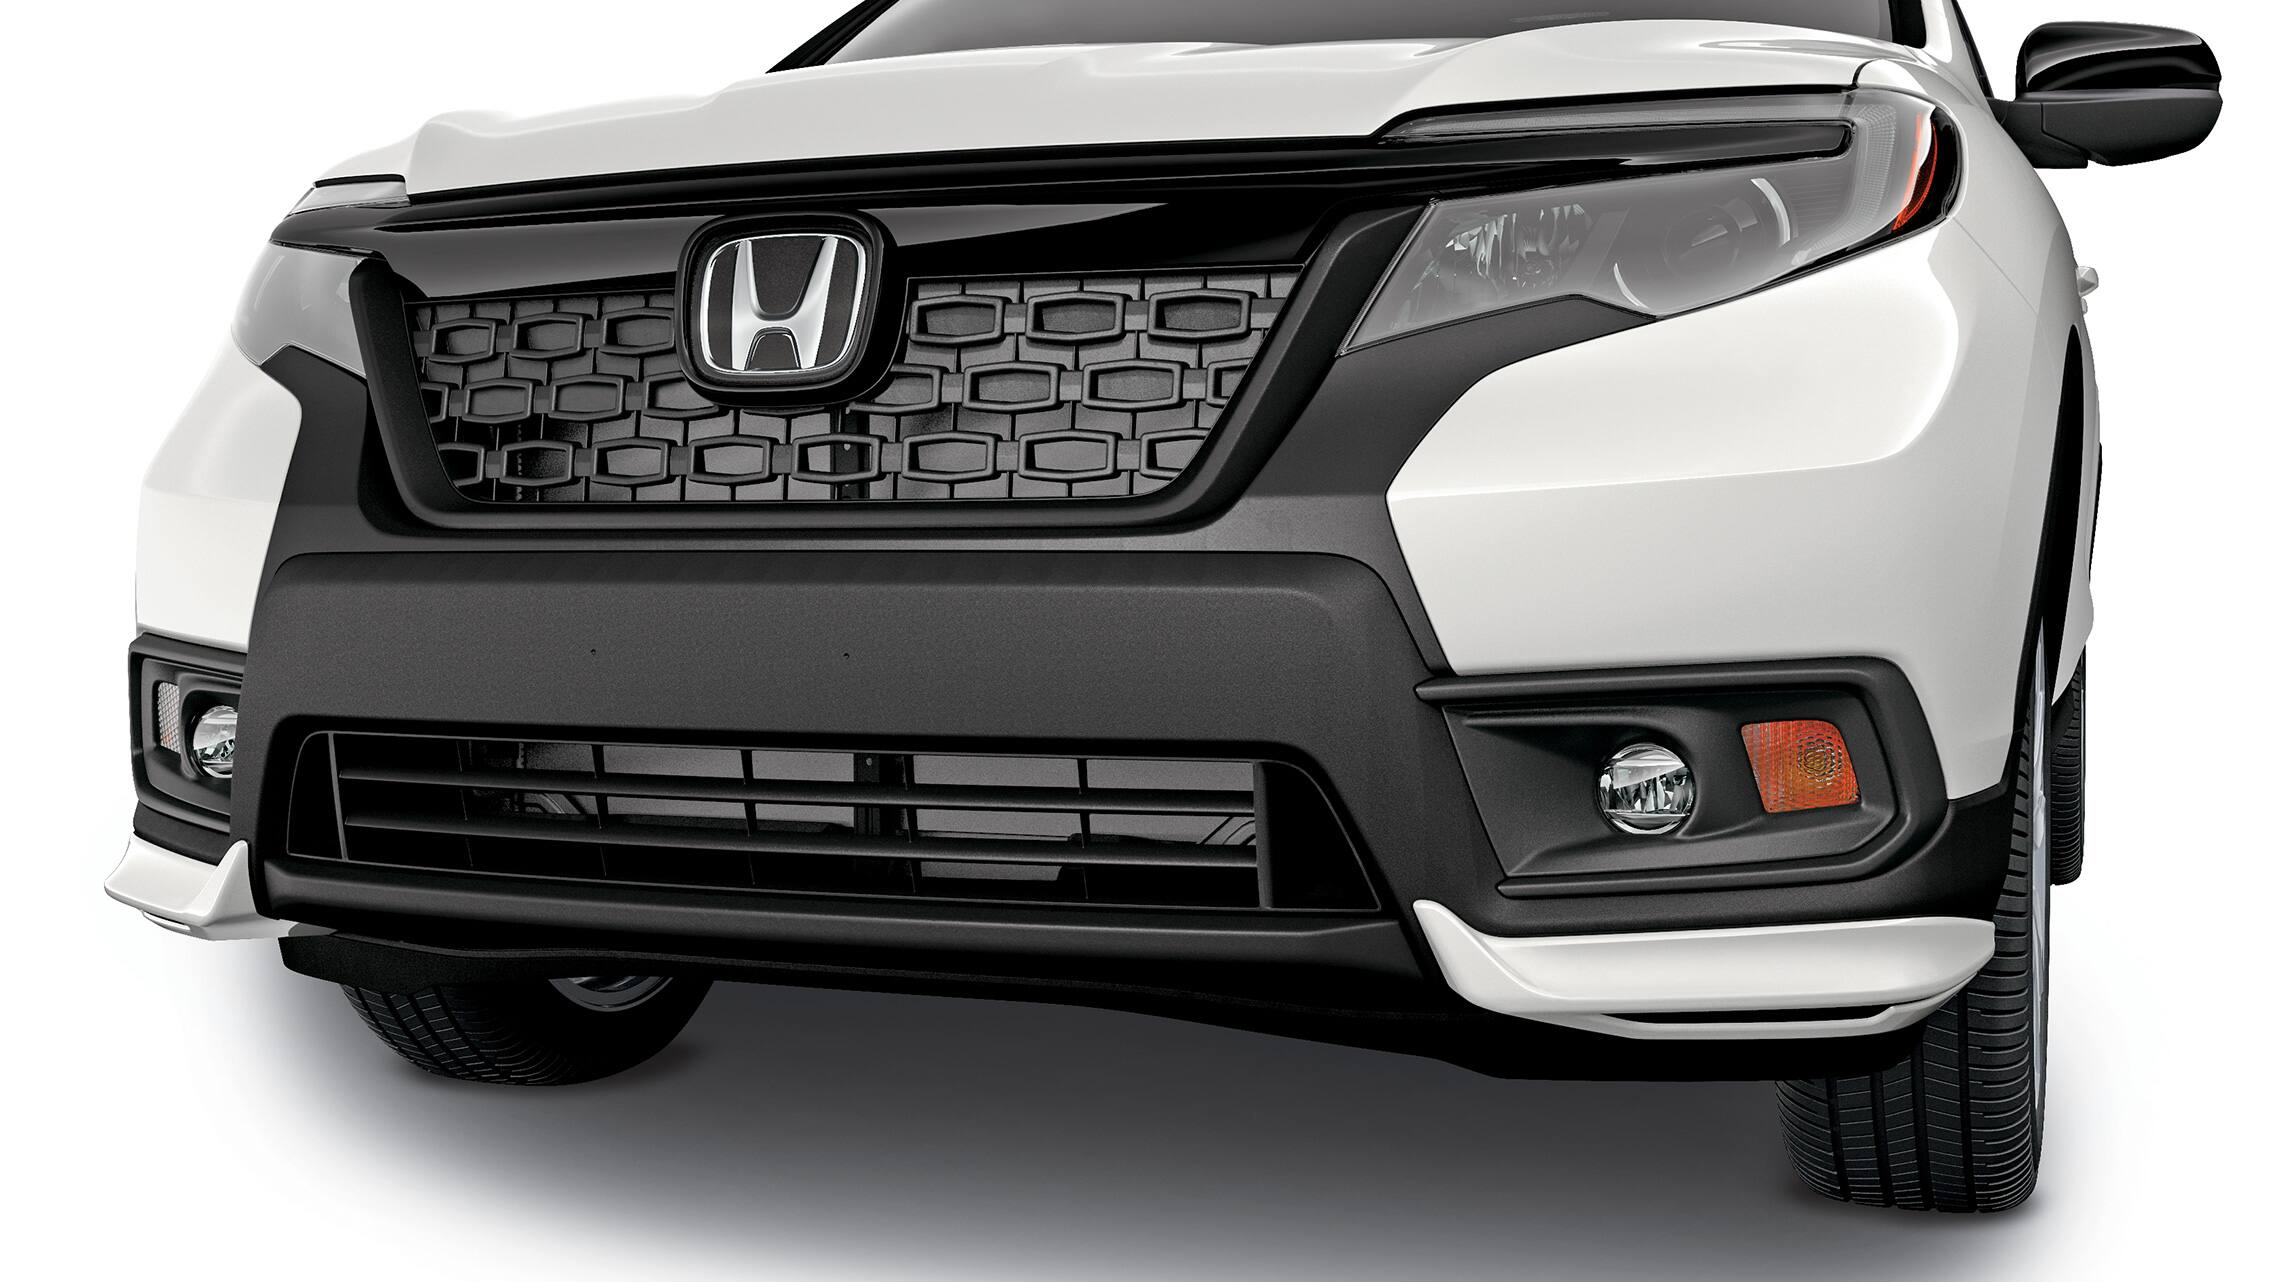 Detail of accessory front underbody spoiler on the 2019 Honda Passport.